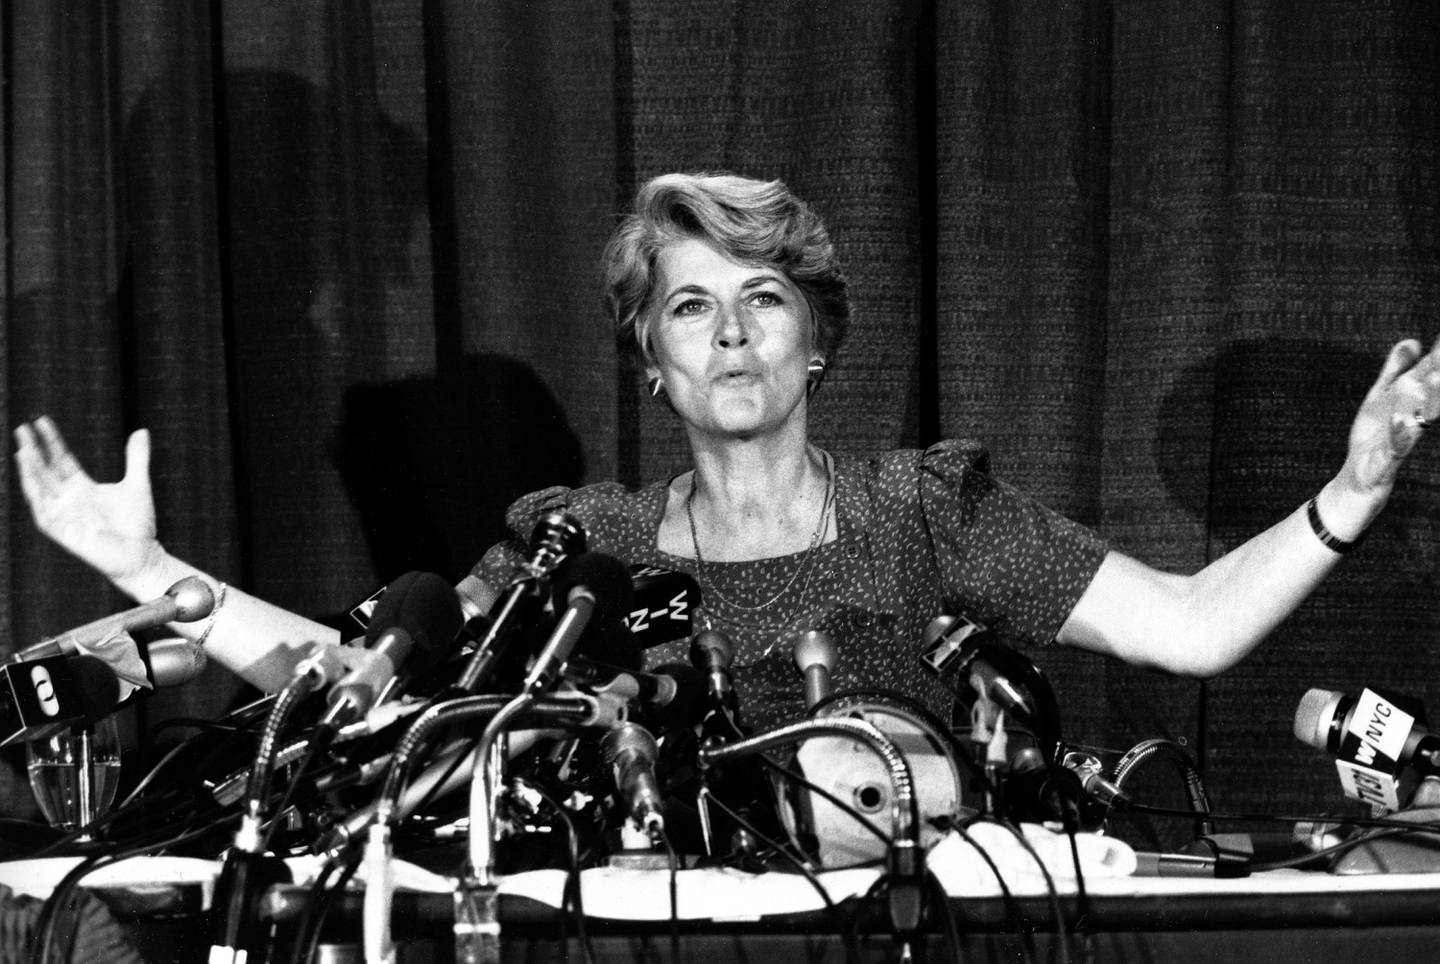 Democratic vice presidential nominee Geraldine Ferraro holds a news conference in New York City, Tuesday, Aug. 21, 1984.  Ferraro said she deliberately kept her finances separate from those of her husband, New York developer John A. Zaccaro, and she is glad the records have been released. (AP Photo/Ron Frehm)